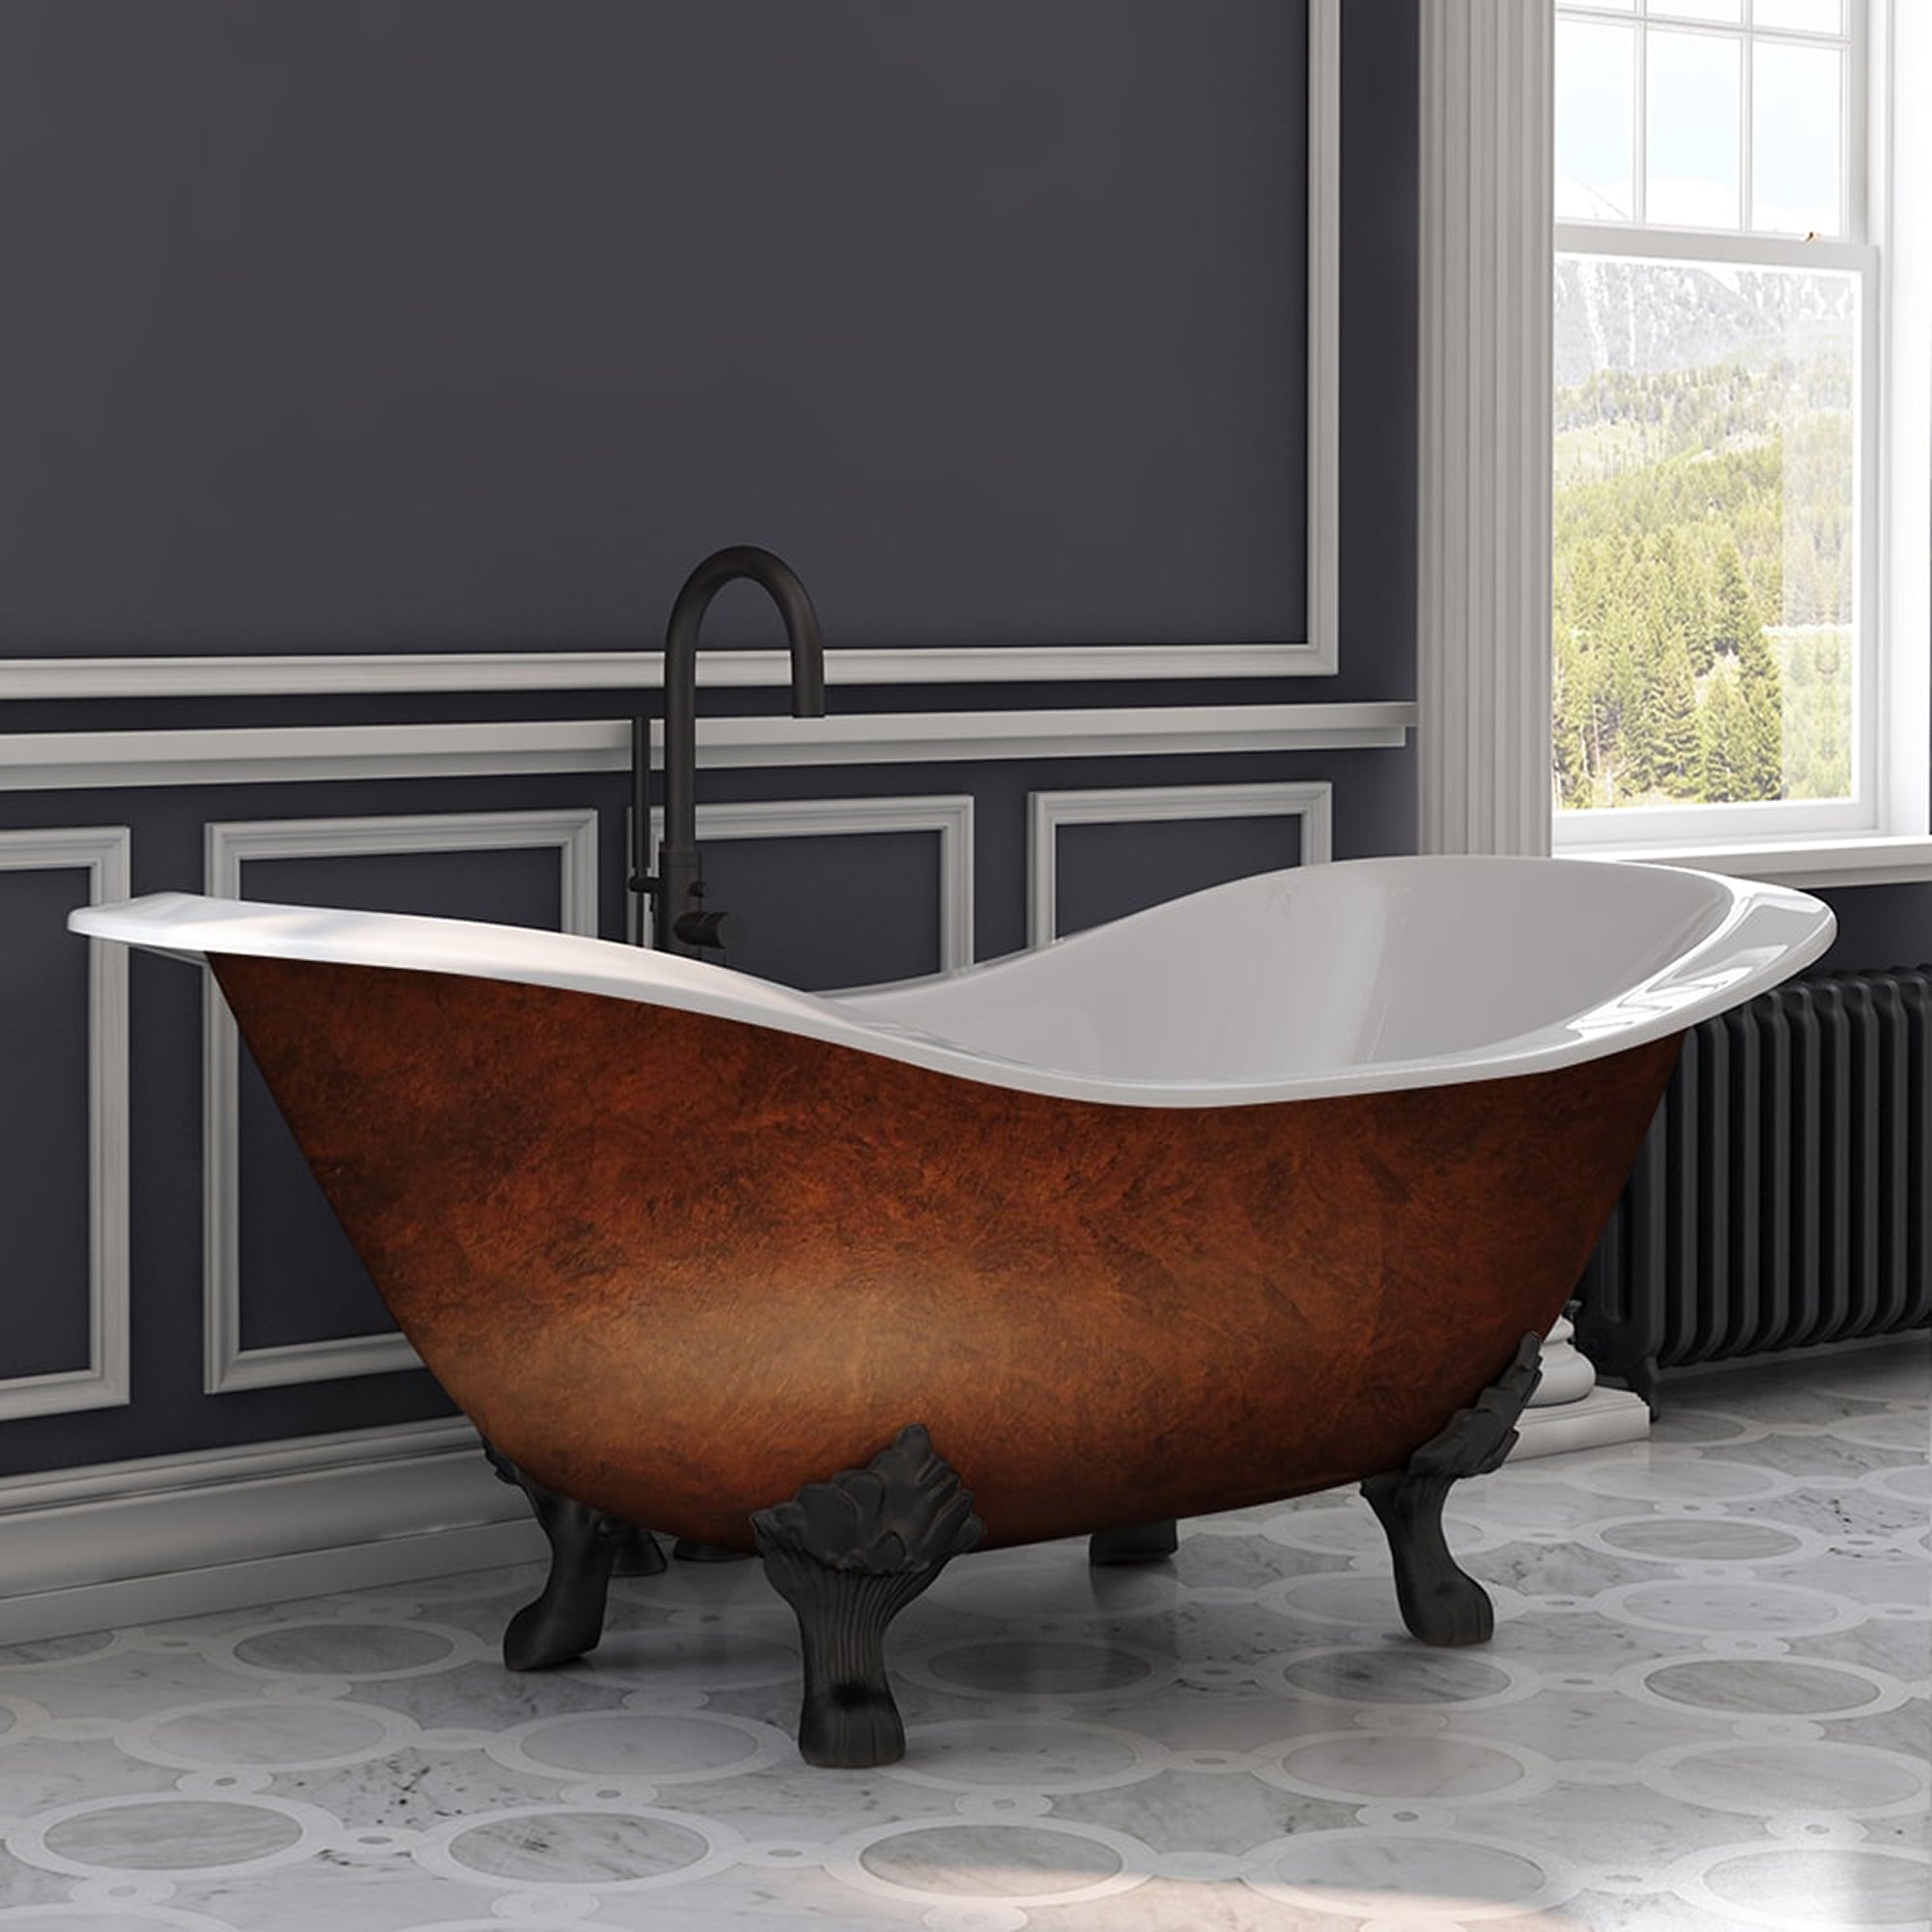 Cambridge Plumbing 71" X 30" Double Ended Cast Iron Slipper Clawfoot Tub Hand Painted Faux Copper Bronze Finish with Oil Rubbed Bronze Feet and No Faucet Drillings DES-NH-ORB-CB - Vital Hydrotherapy